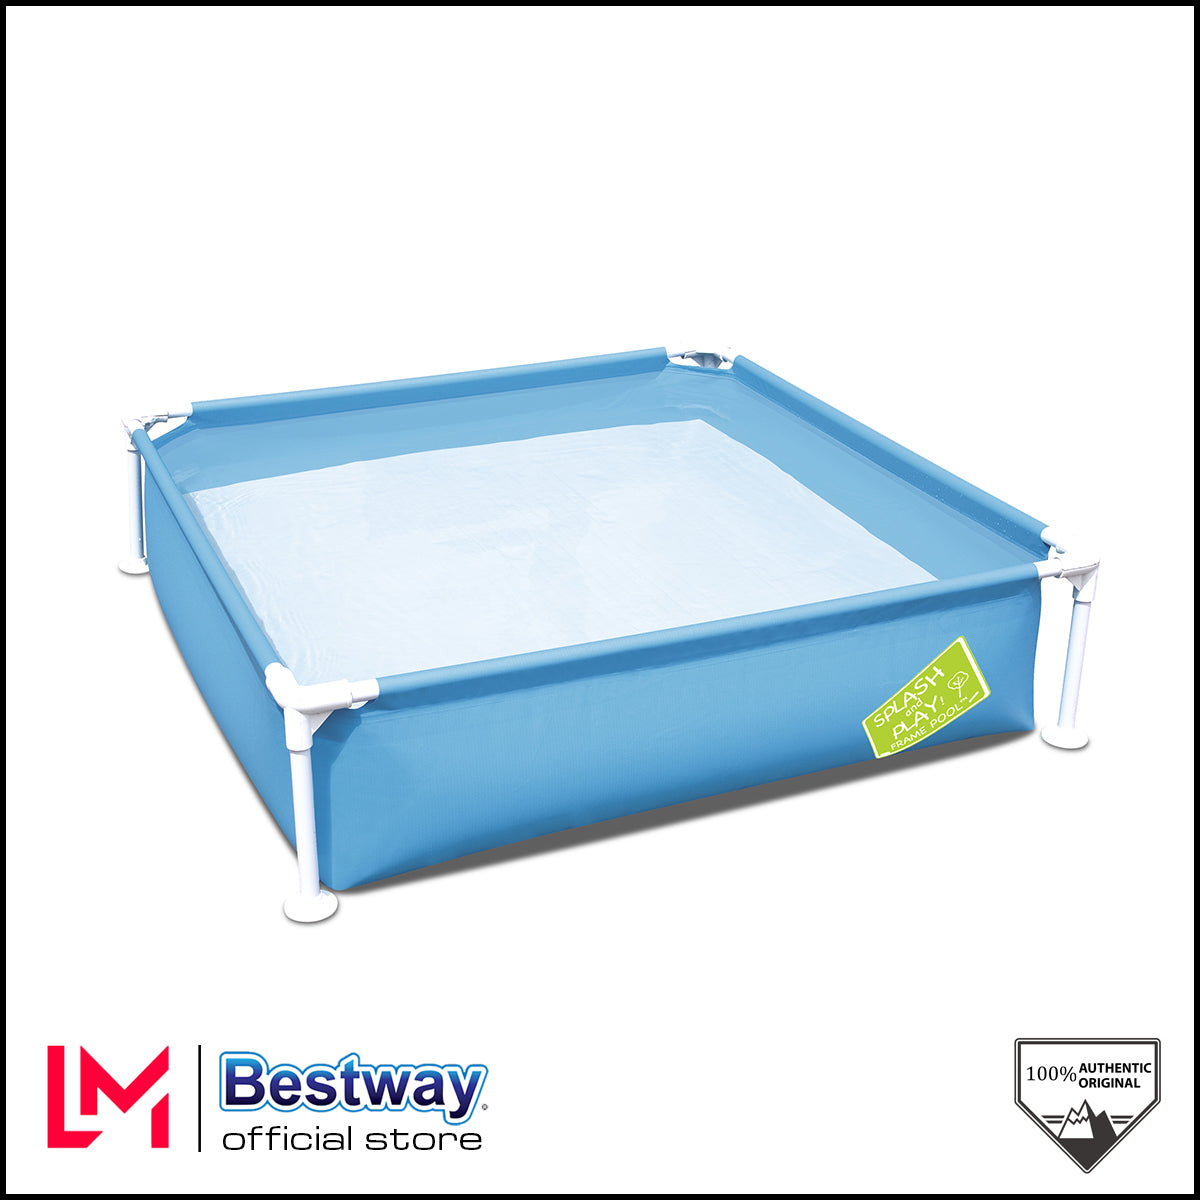 Bestway My First Frame Pool (for 2 years old)